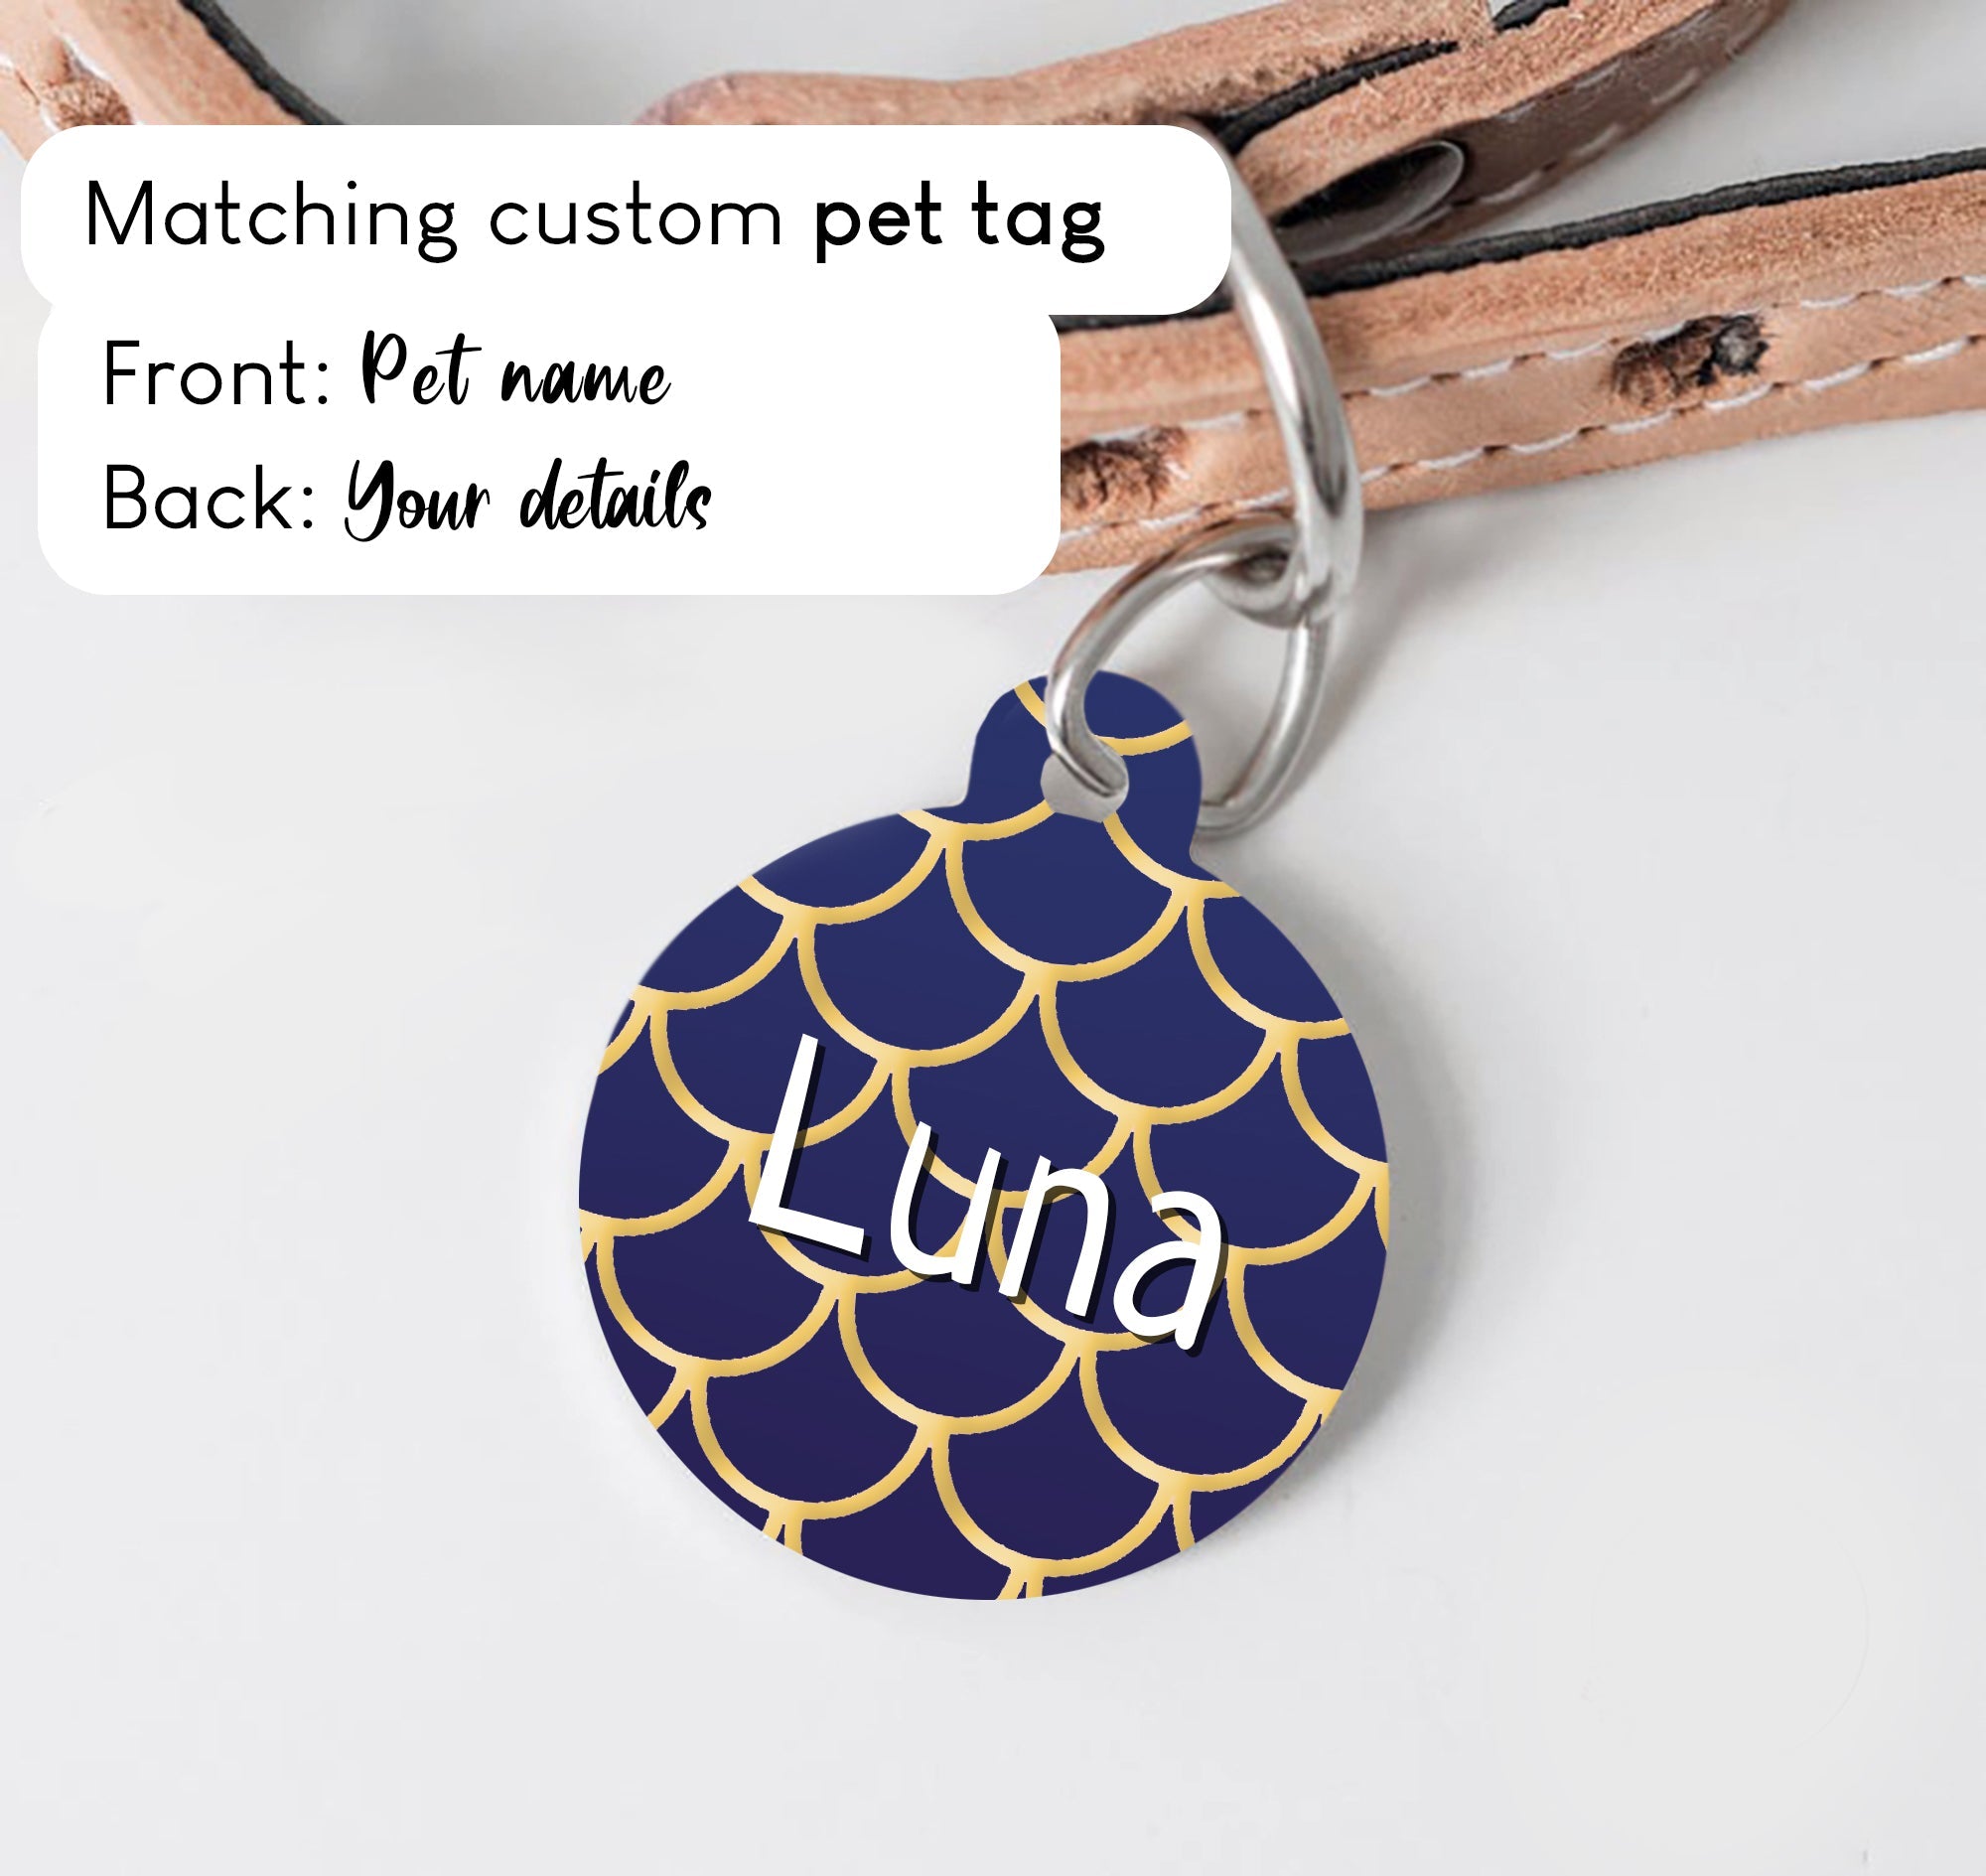 Blue, Navy blue with Golden Scale Pattern Dog Collar - S-L sizes with custom matching pet tag - Adventures of Rubi